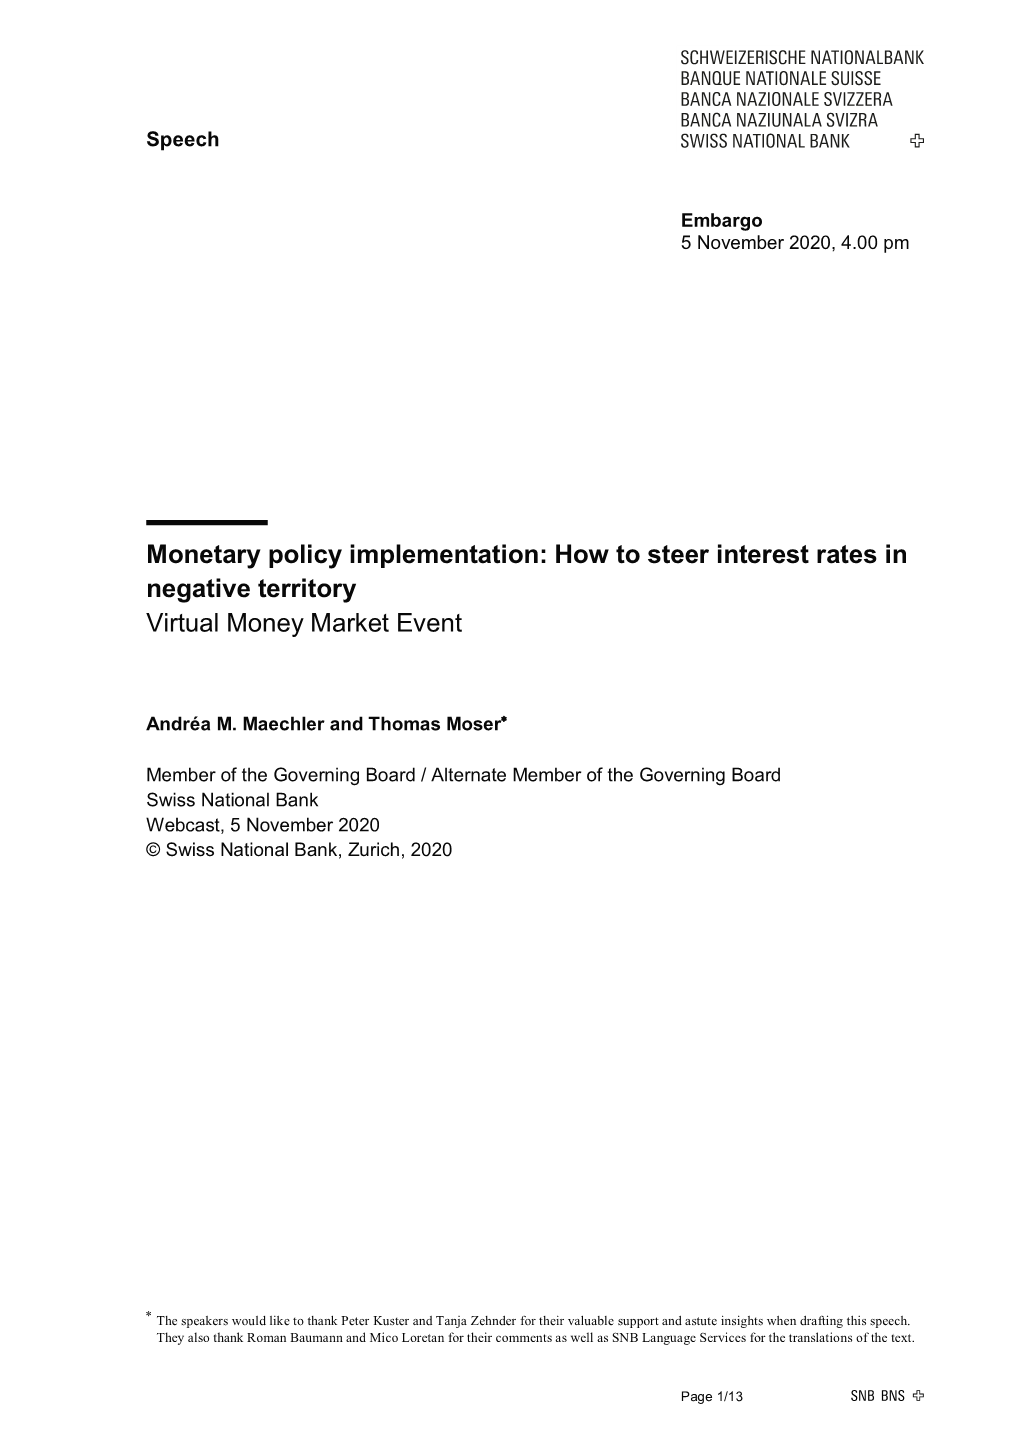 Monetary Policy Implementation: How to Steer Interest Rates in Negative Territory Virtual Money Market Event